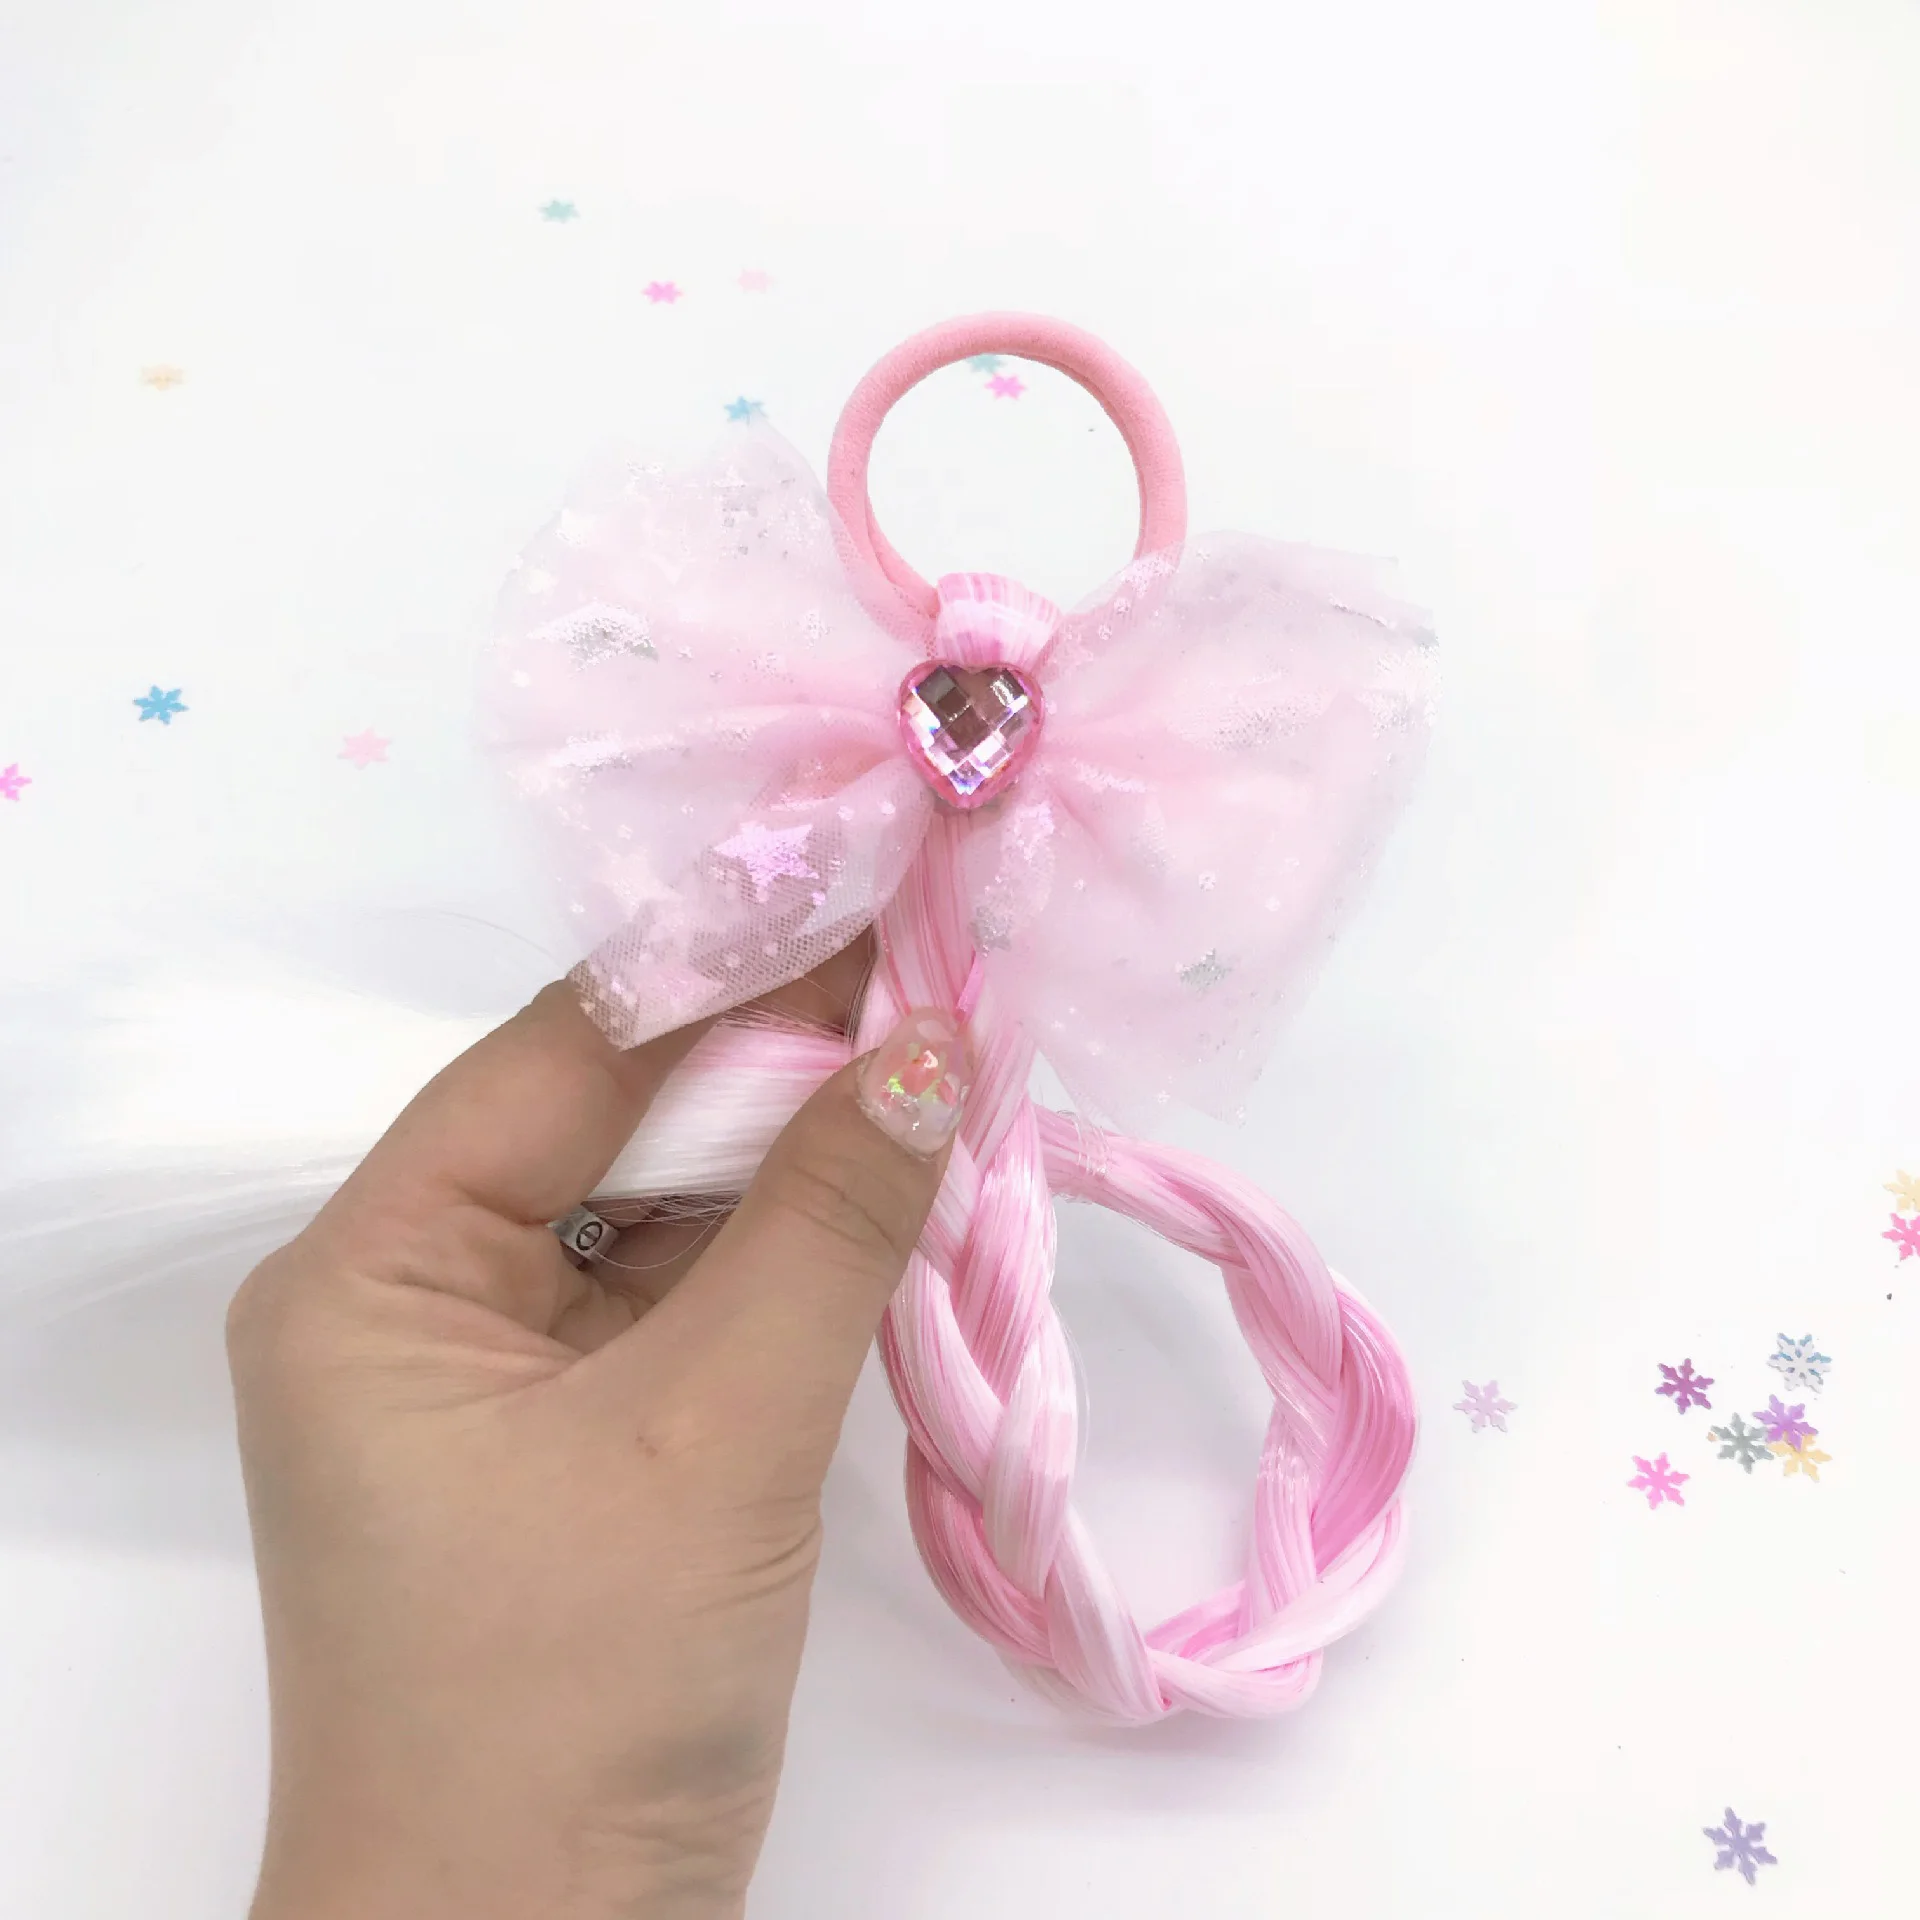 New Princess Pigtail Elastic Hair Band for Girls with Twist Braid Wig Lace Bow Sequin Snowflake Hair Ties Scrunchies Headwear